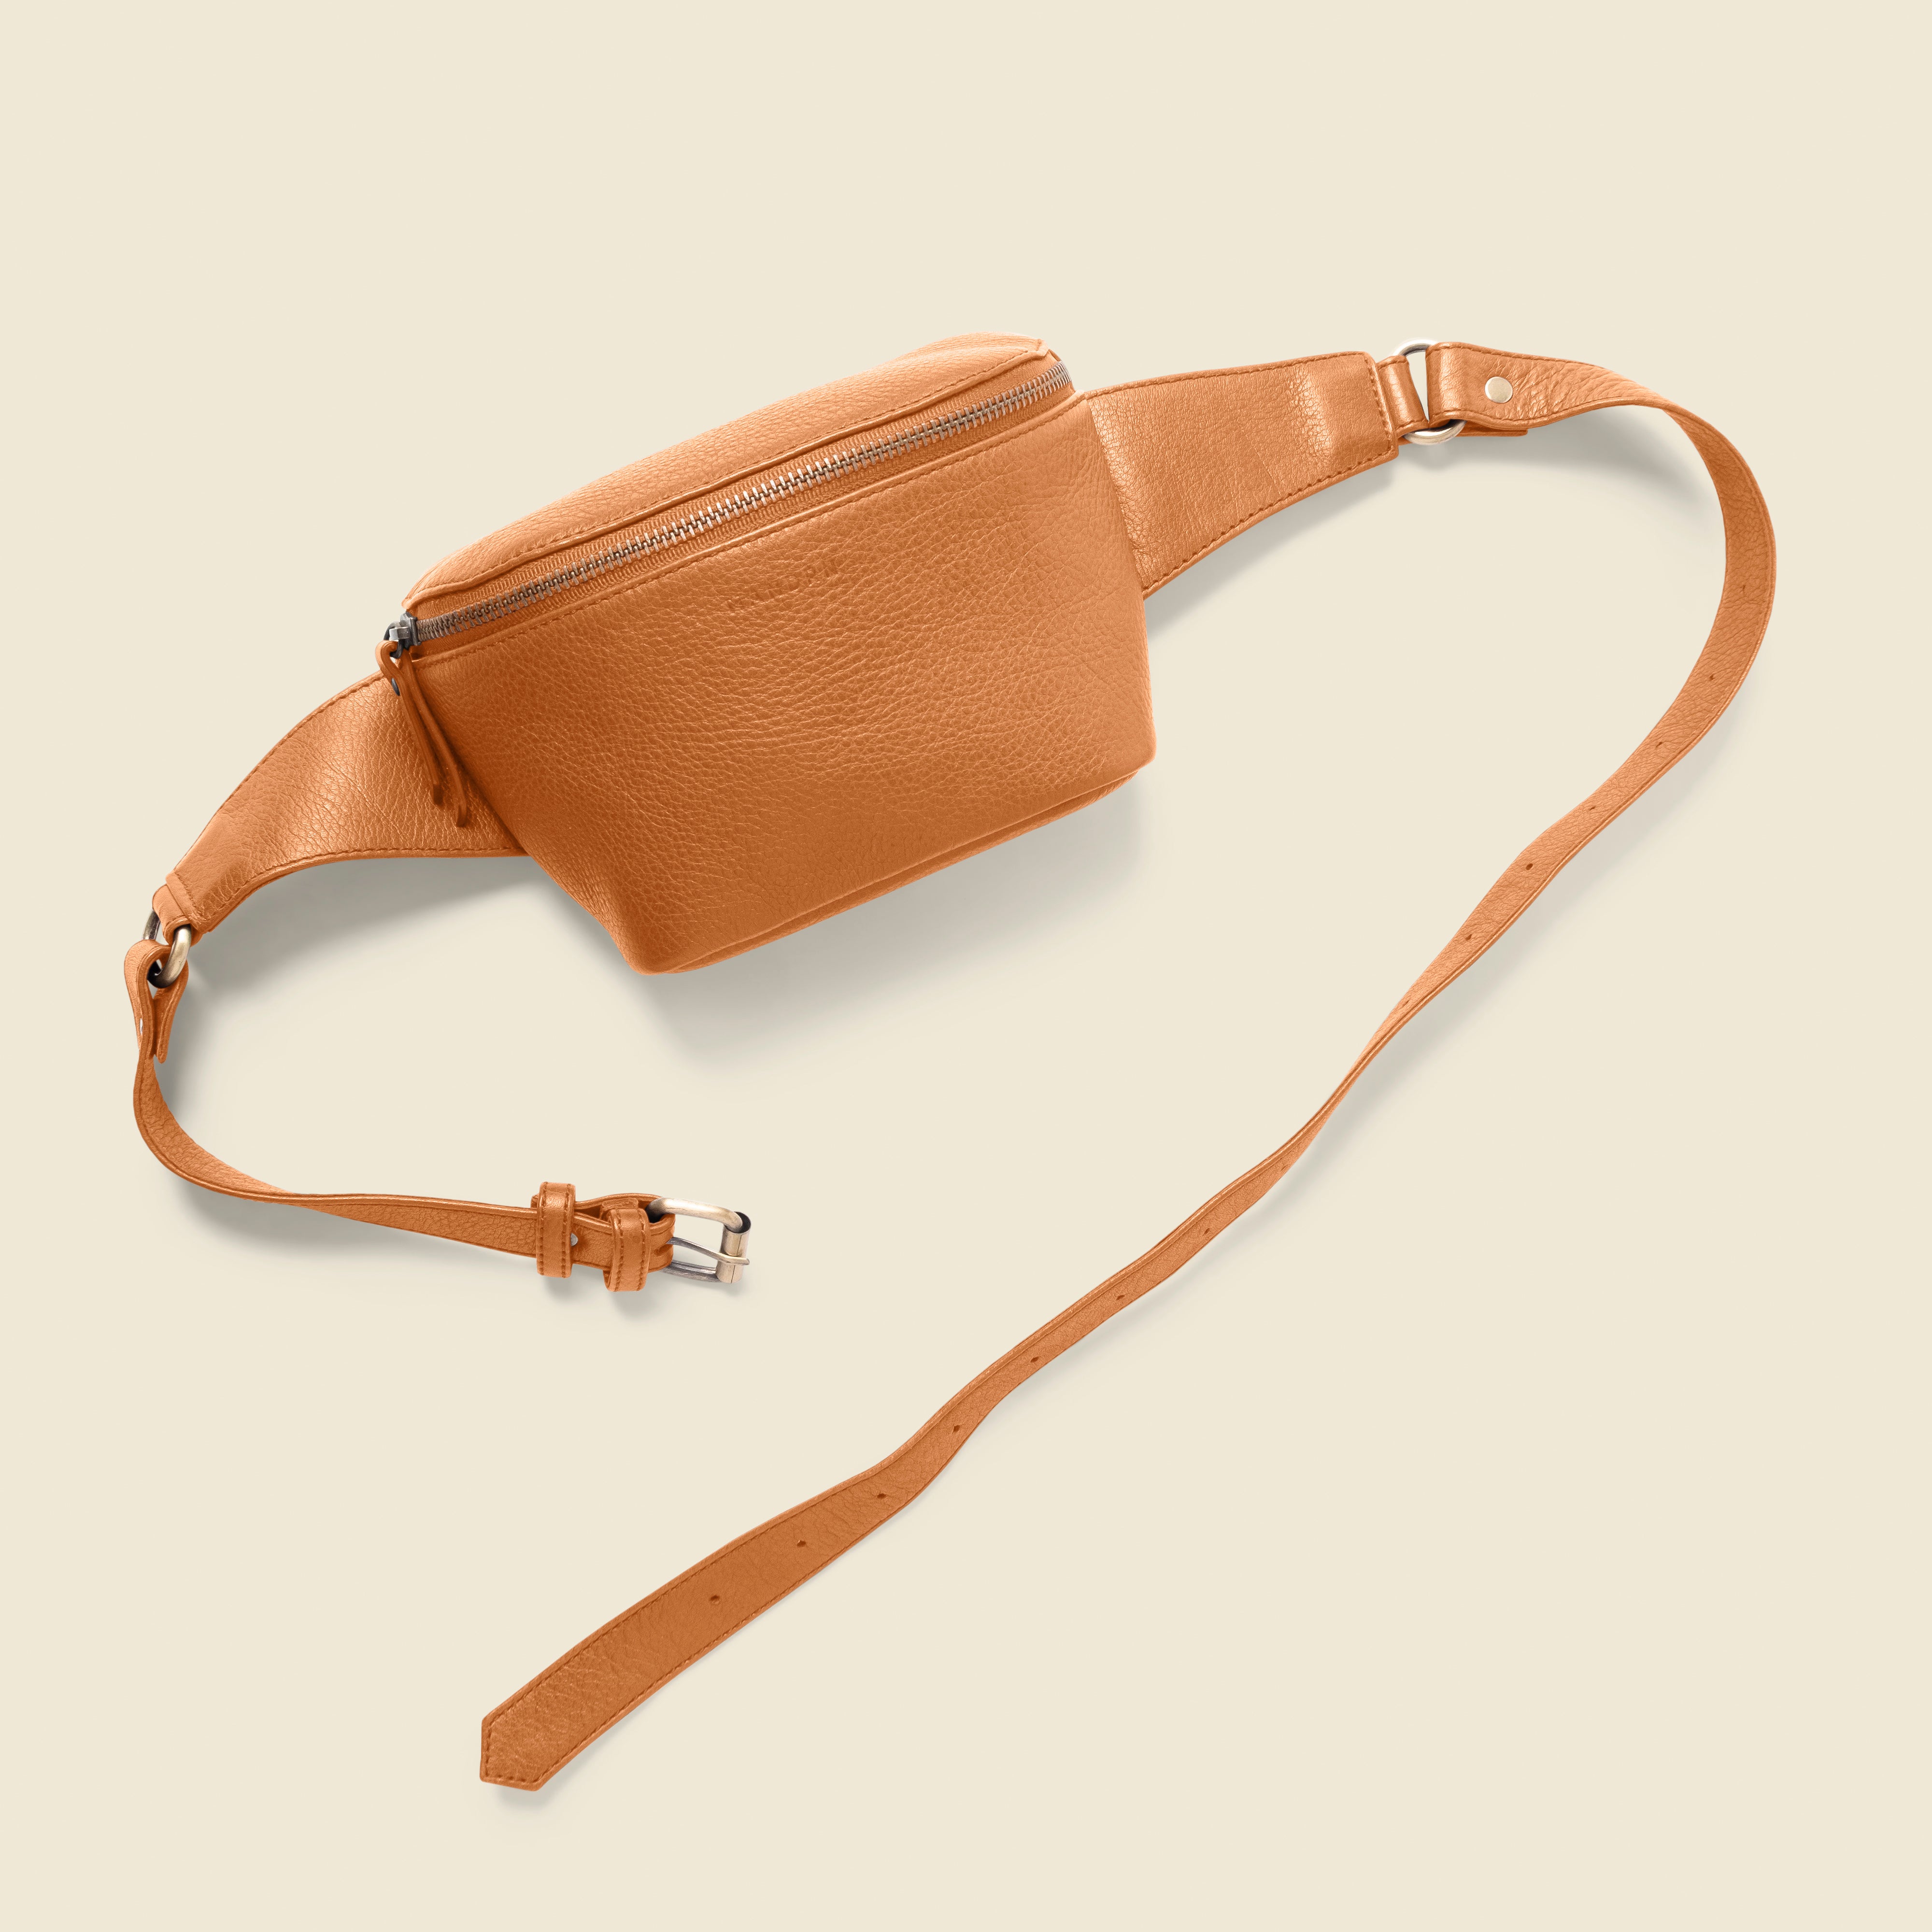 tan leather fanny pack bag for private events and corporate gifts.